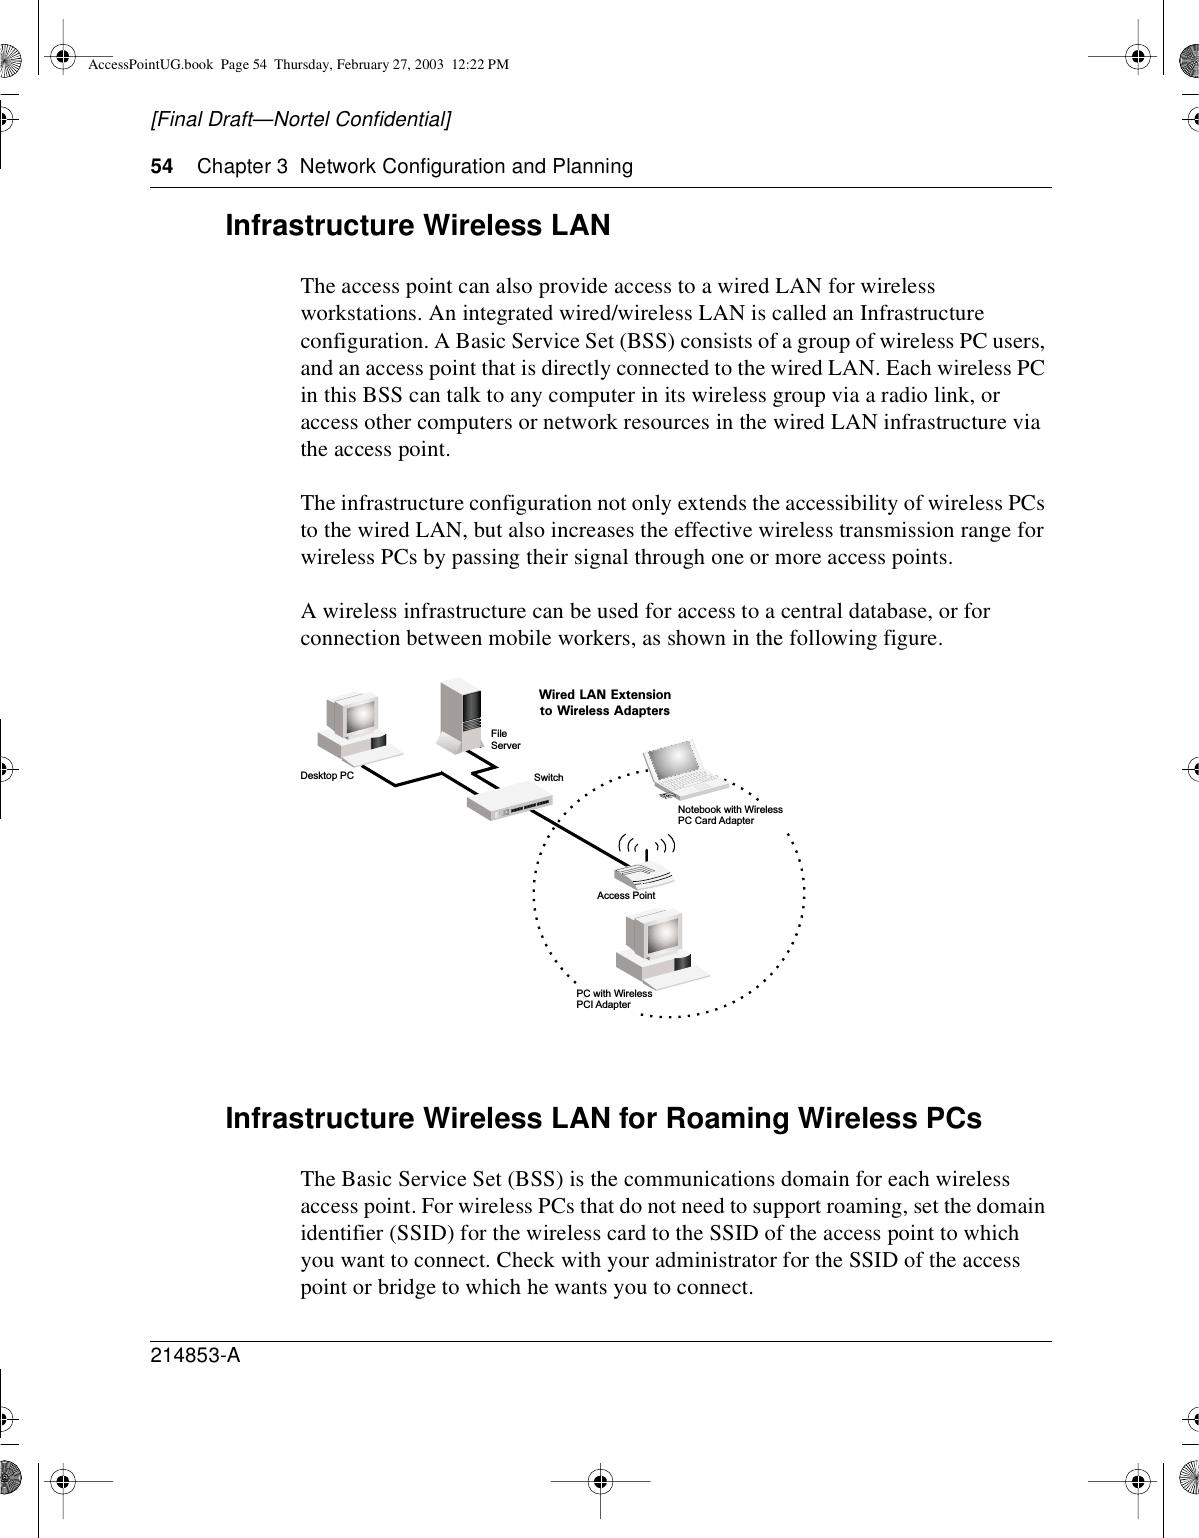 54 Chapter 3 Network Configuration and Planning214853-A[Final Draft—Nortel Confidential]Infrastructure Wireless LANThe access point can also provide access to a wired LAN for wirelessworkstations. An integrated wired/wireless LAN is called an Infrastructureconfiguration. A Basic Service Set (BSS) consists of a group of wireless PC users,and an access point that is directly connected to the wired LAN. Each wireless PCin this BSS can talk to any computer in its wireless group via a radio link, oraccess other computers or network resources in the wired LAN infrastructure viathe access point.The infrastructure configuration not only extends the accessibility of wireless PCsto the wired LAN, but also increases the effective wireless transmission range forwireless PCs by passing their signal through one or more access points.A wireless infrastructure can be used for access to a central database, or forconnection between mobile workers, as shown in the following figure.Infrastructure Wireless LAN for Roaming Wireless PCsThe Basic Service Set (BSS) is the communications domain for each wirelessaccess point. For wireless PCs that do not need to support roaming, set the domainidentifier (SSID) for the wireless card to the SSID of the access point to whichyou want to connect. Check with your administrator for the SSID of the accesspoint or bridge to which he wants you to connect.FileServerSwitchDesktop PCAccess PointWired LAN Extensionto Wireless AdaptersPC with WirelessPCI AdapterNotebook with WirelessPC Card AdapterAccessPointUG.book Page 54 Thursday, February 27, 2003 12:22 PM